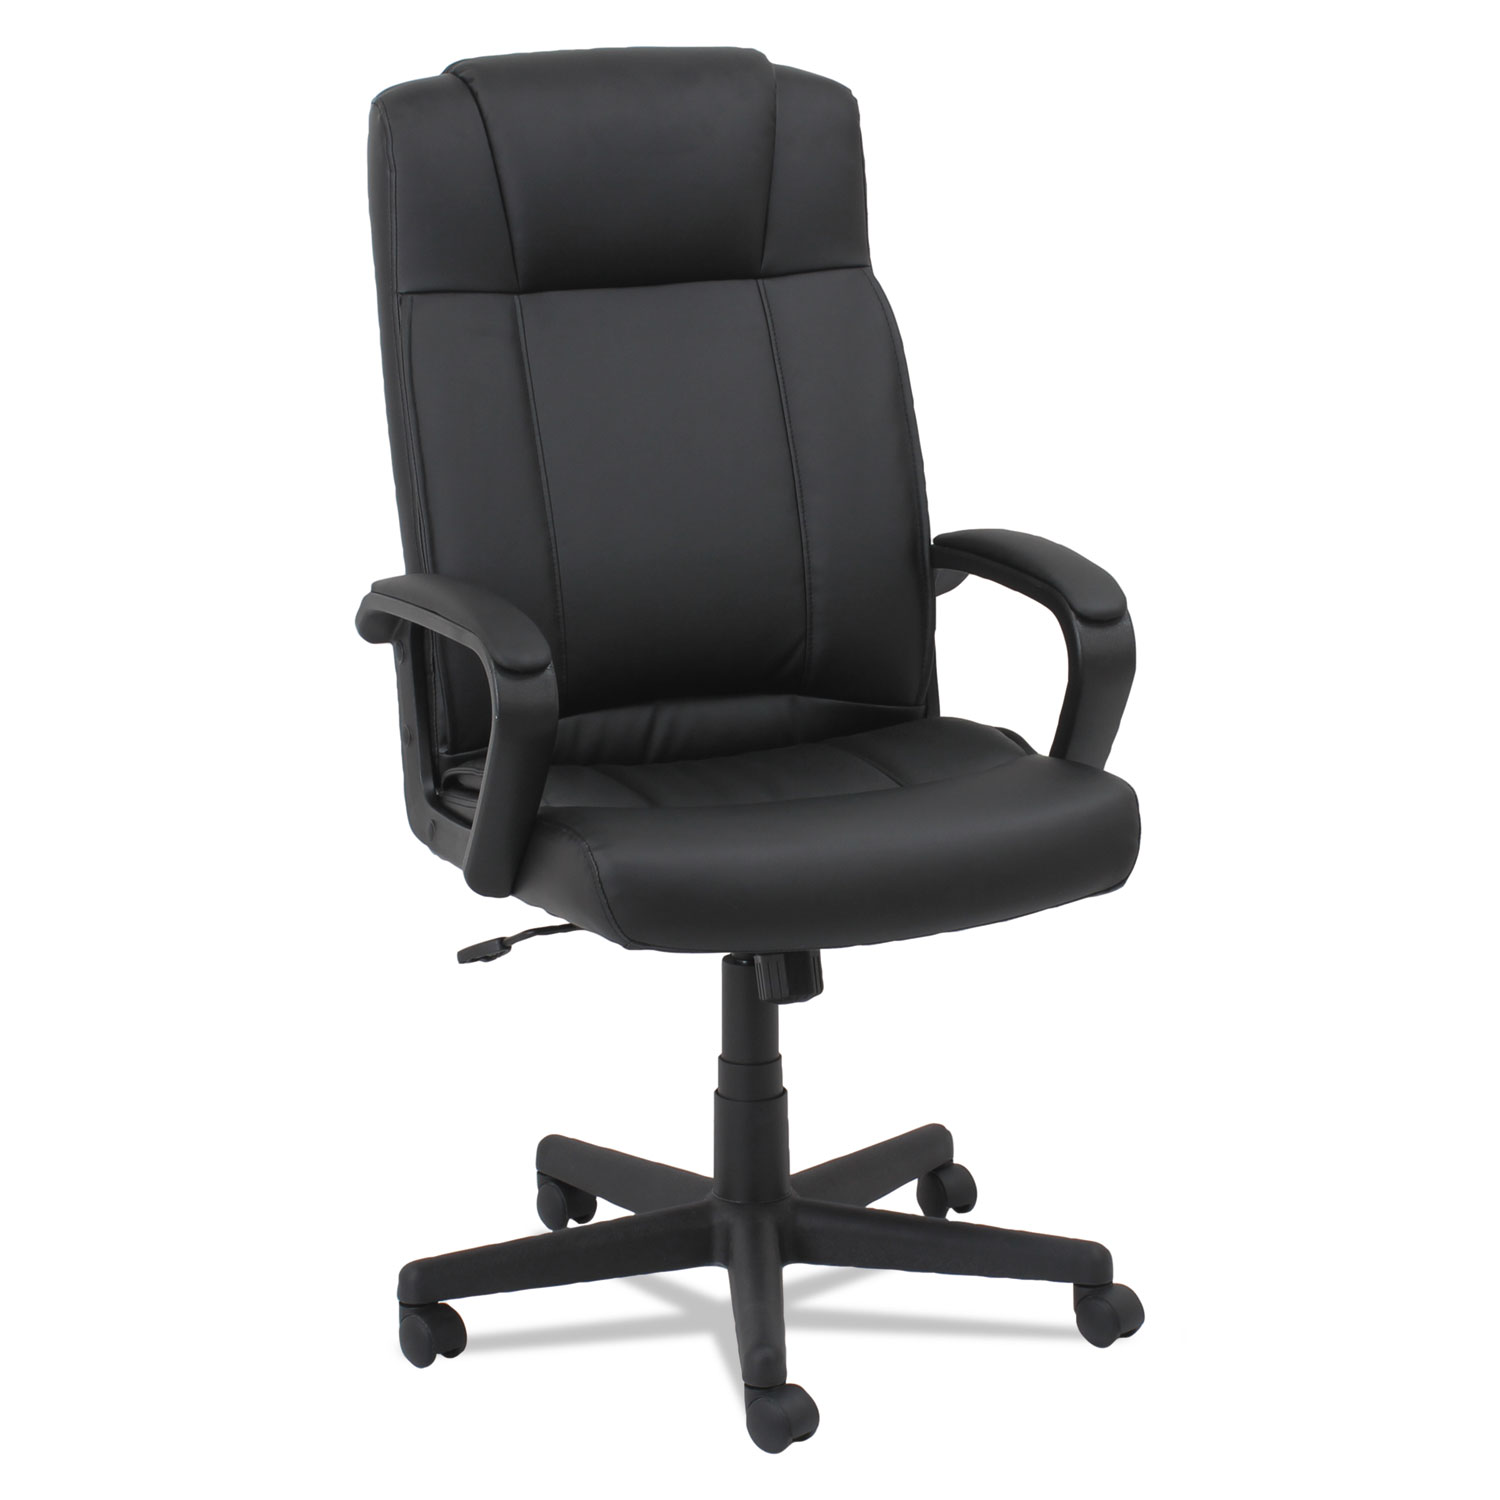  OIF OIFSL4119 Leather High-Back Chair, Supports up to 250 lbs., Black Seat/Black Back, Black Base (OIFSL4119) 